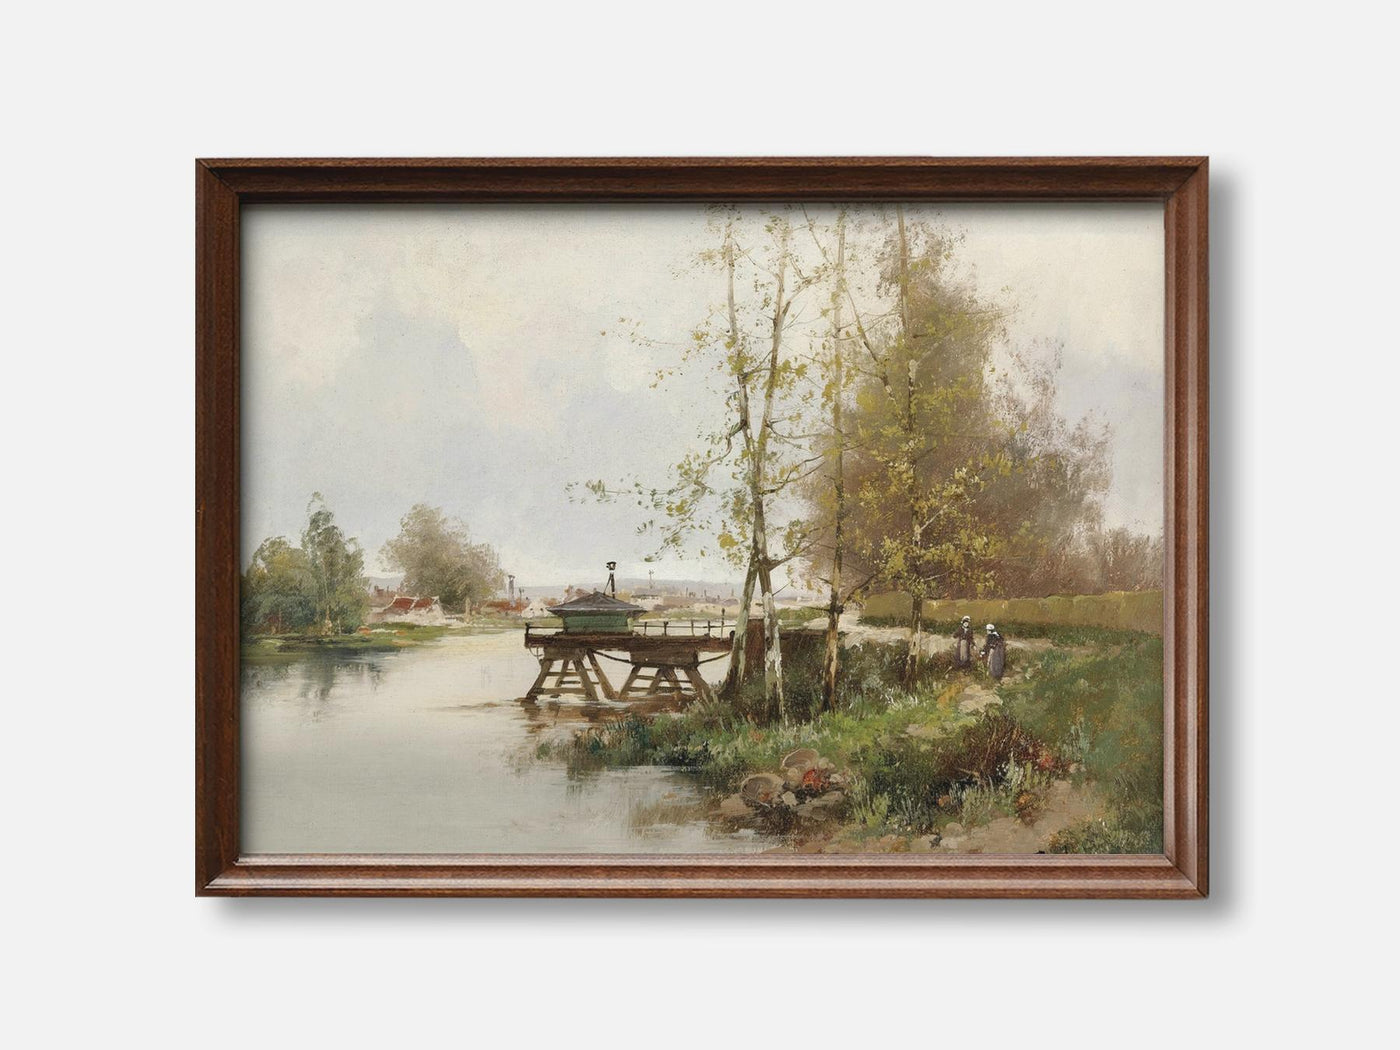 The Pond at the edge of the village Art Print mockup - A_p15-V1-PC_F+WA-SS_1-PS_5x7-C_def